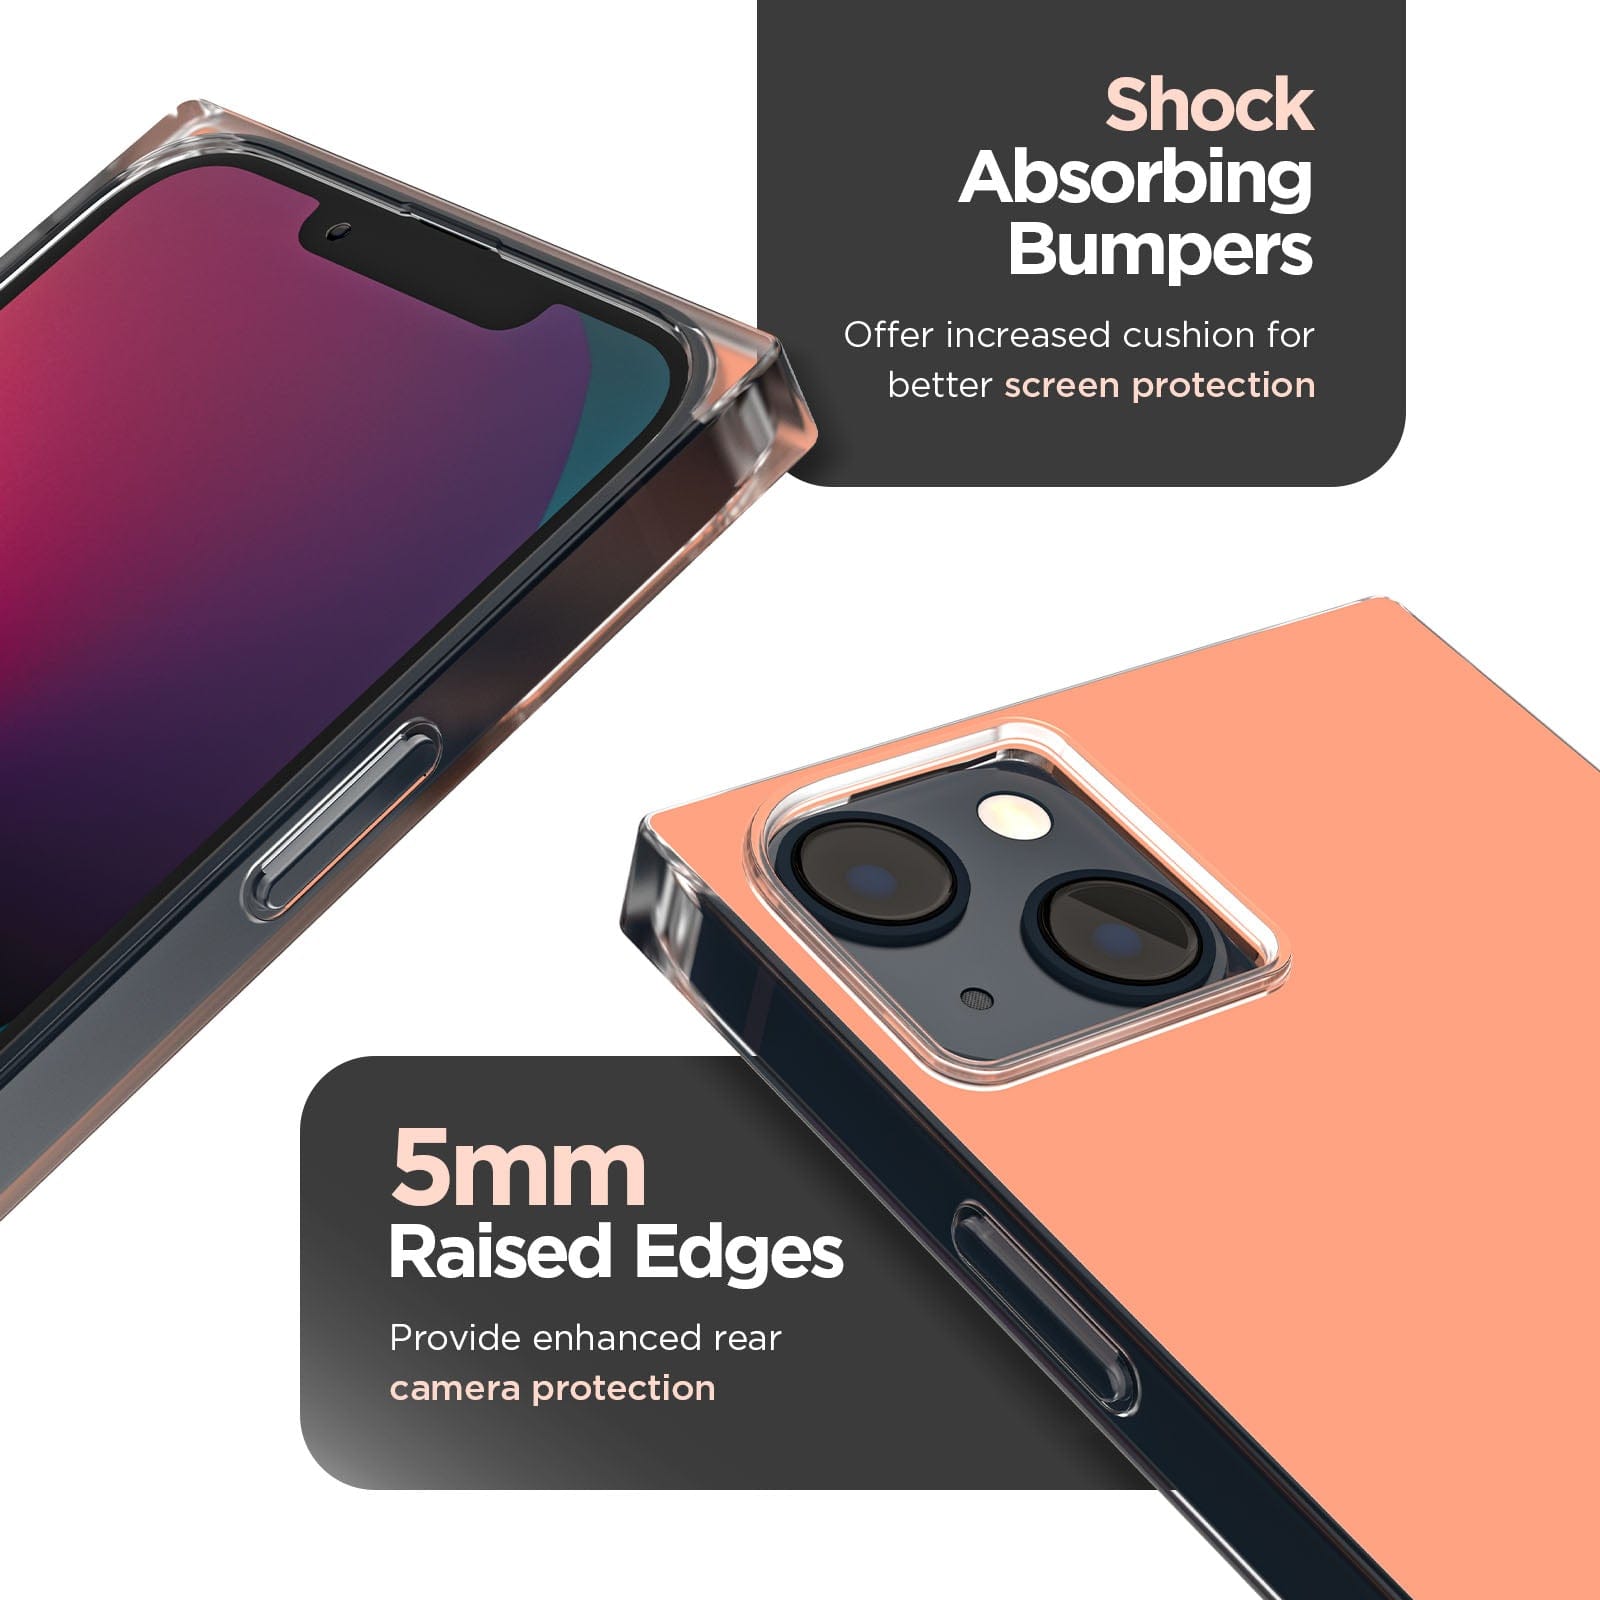 Shock absorbing bumpers. Offer increased cushion for better screen protection. 5mm raised edges provide enhanced rear camera protection. color::Clay Pink